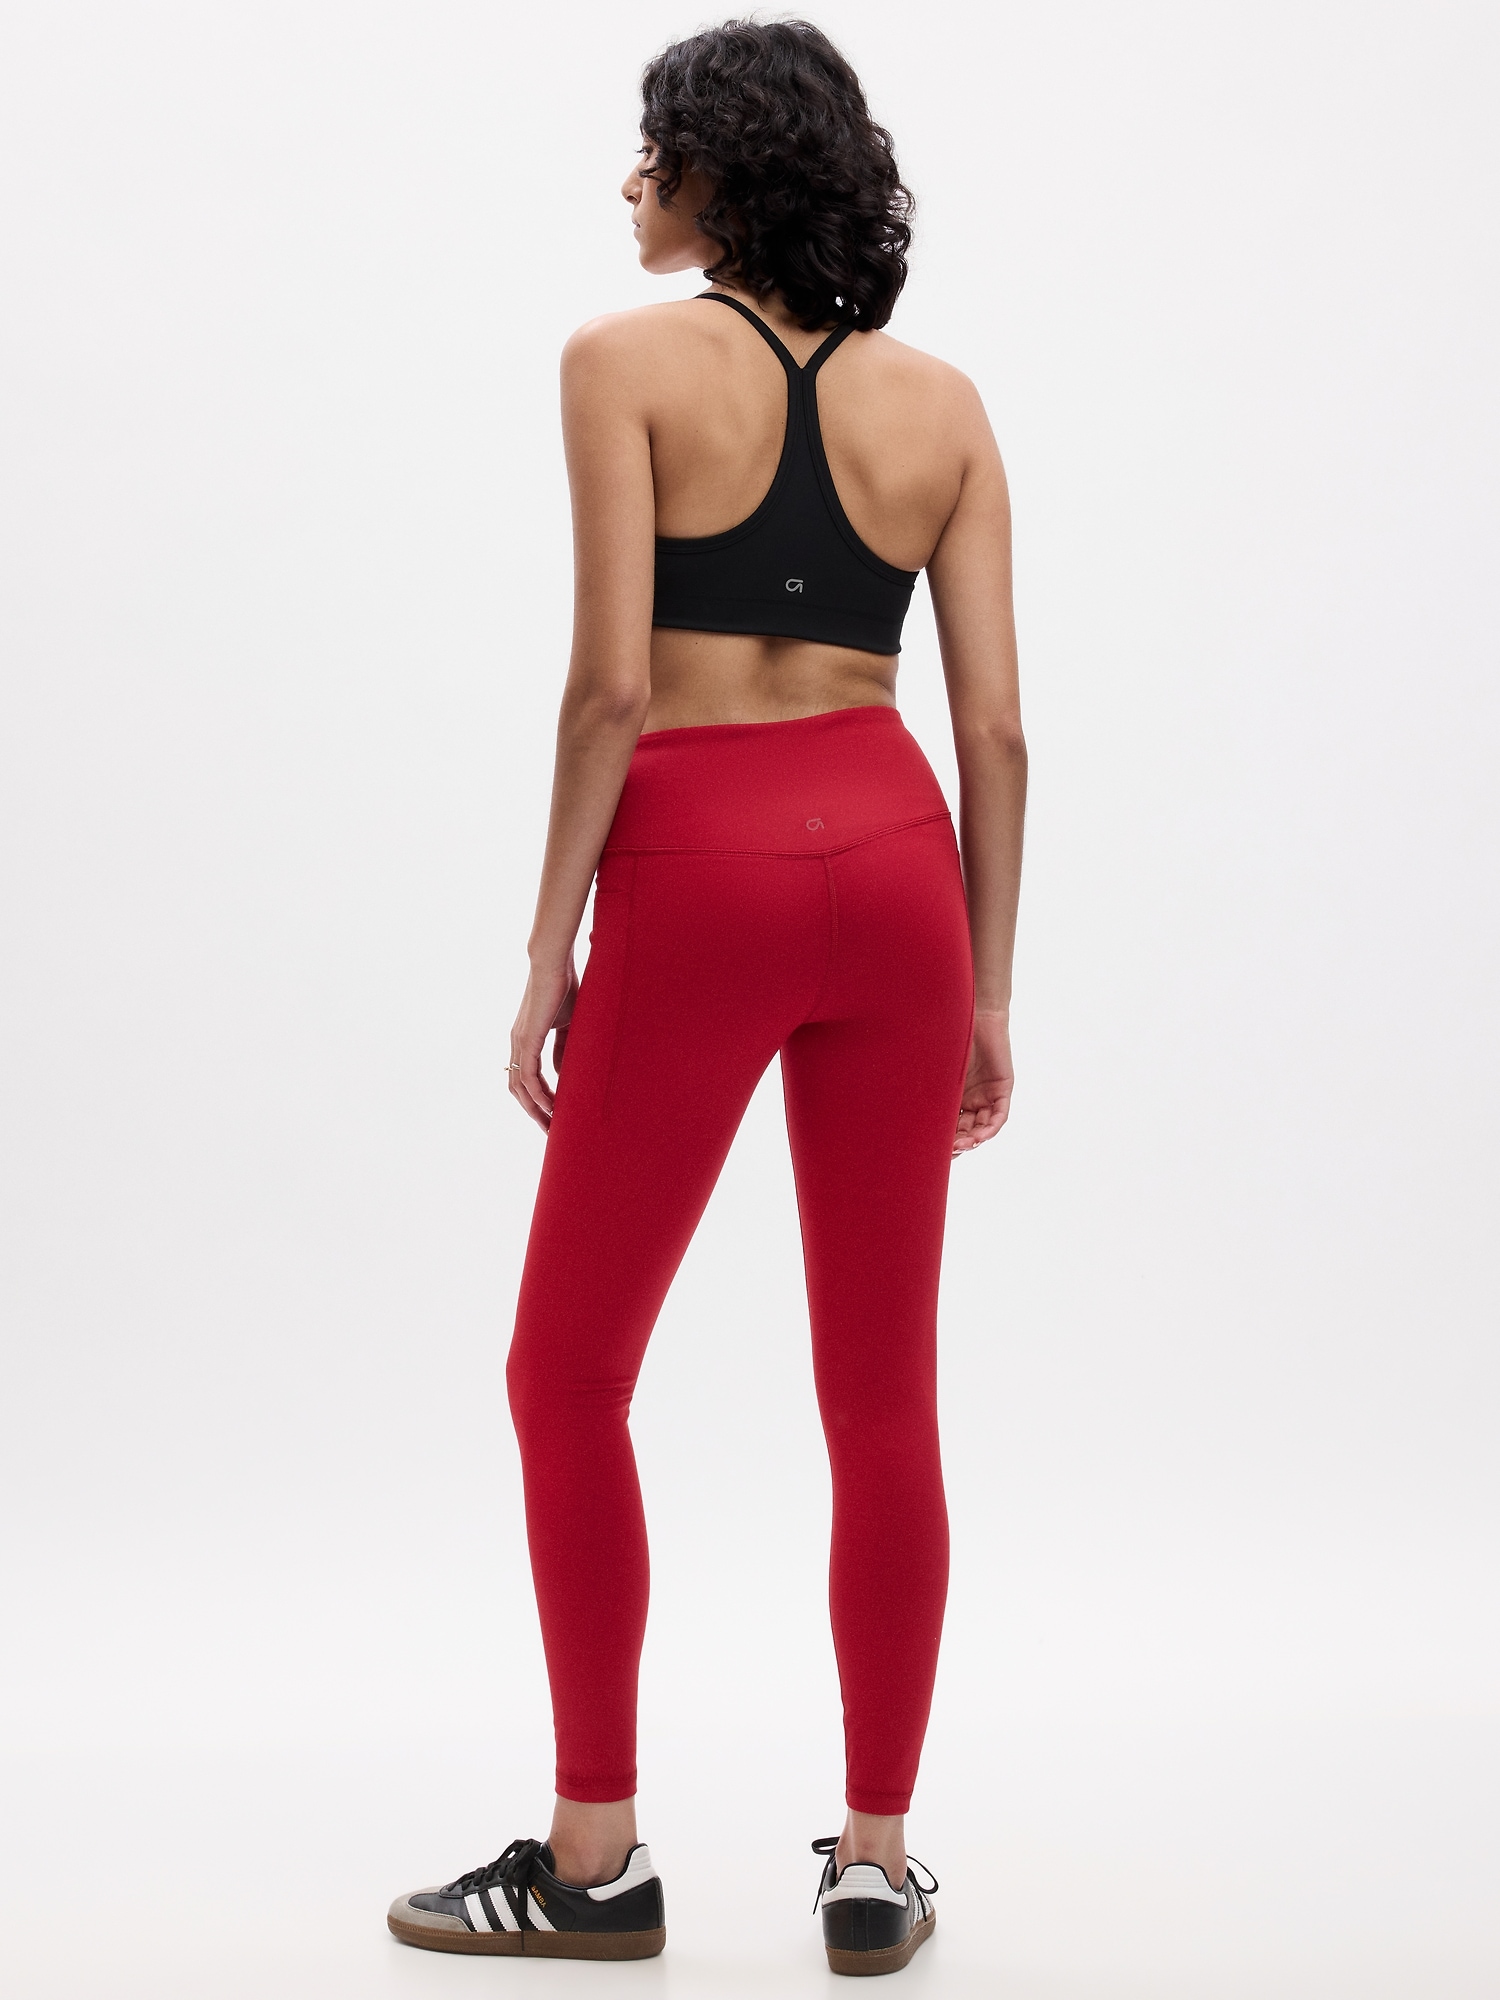 Freedom Leggings (Crimson)  Best leggings, Athleisure outfits, 4 way  stretch fabric